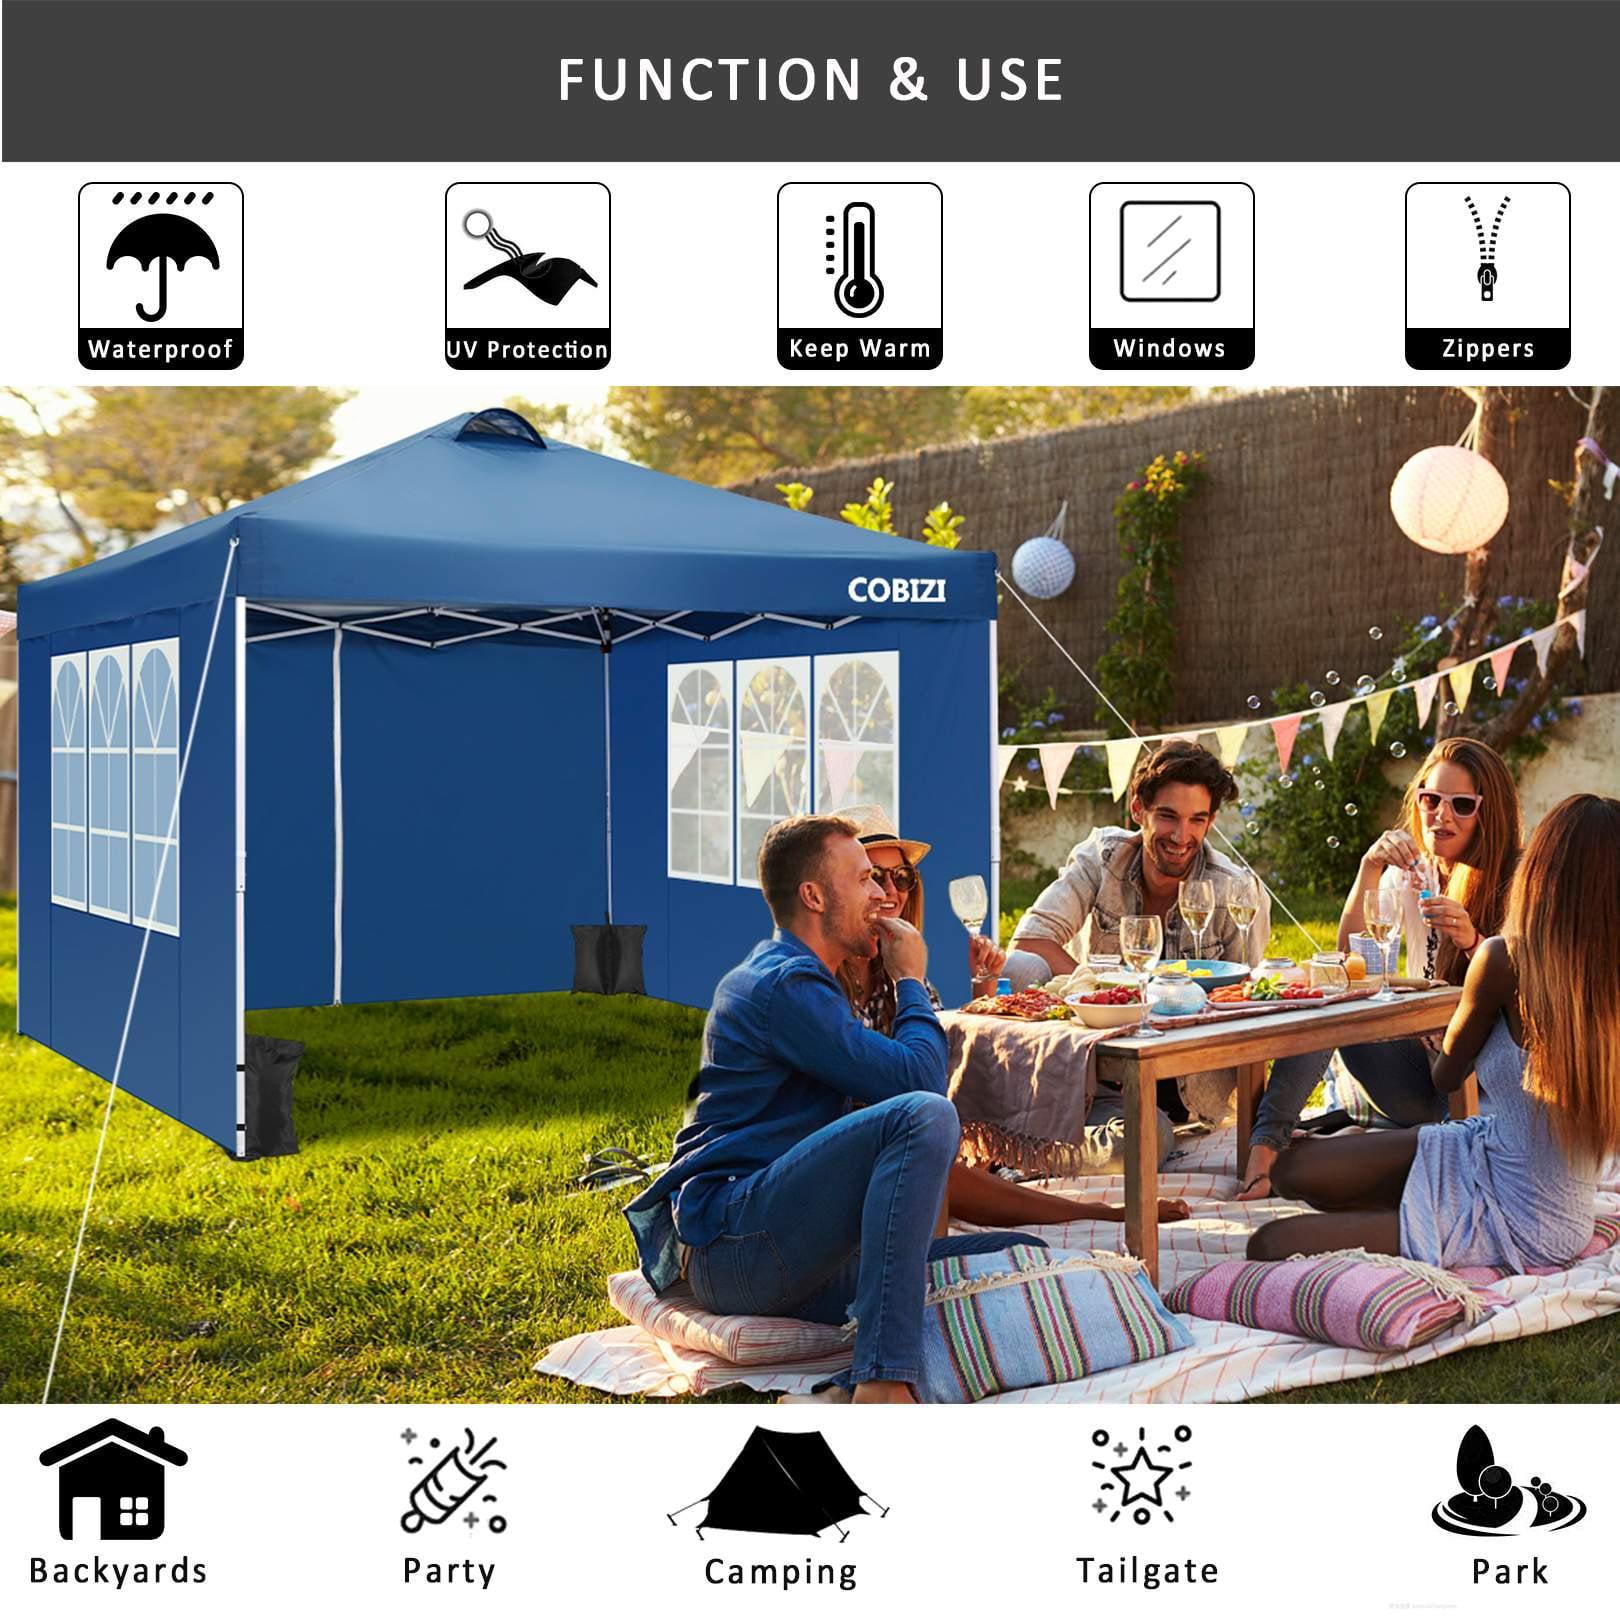 COBIZI Canopy 10' x 10' Pop Up Canopy Tent Heavy Duty Waterproof Adjustable Commercial Instant Canopy Outdoor Party Canopy with 4 Removable Sidewalls, Carry Bag, 4 Sandbags, Blue